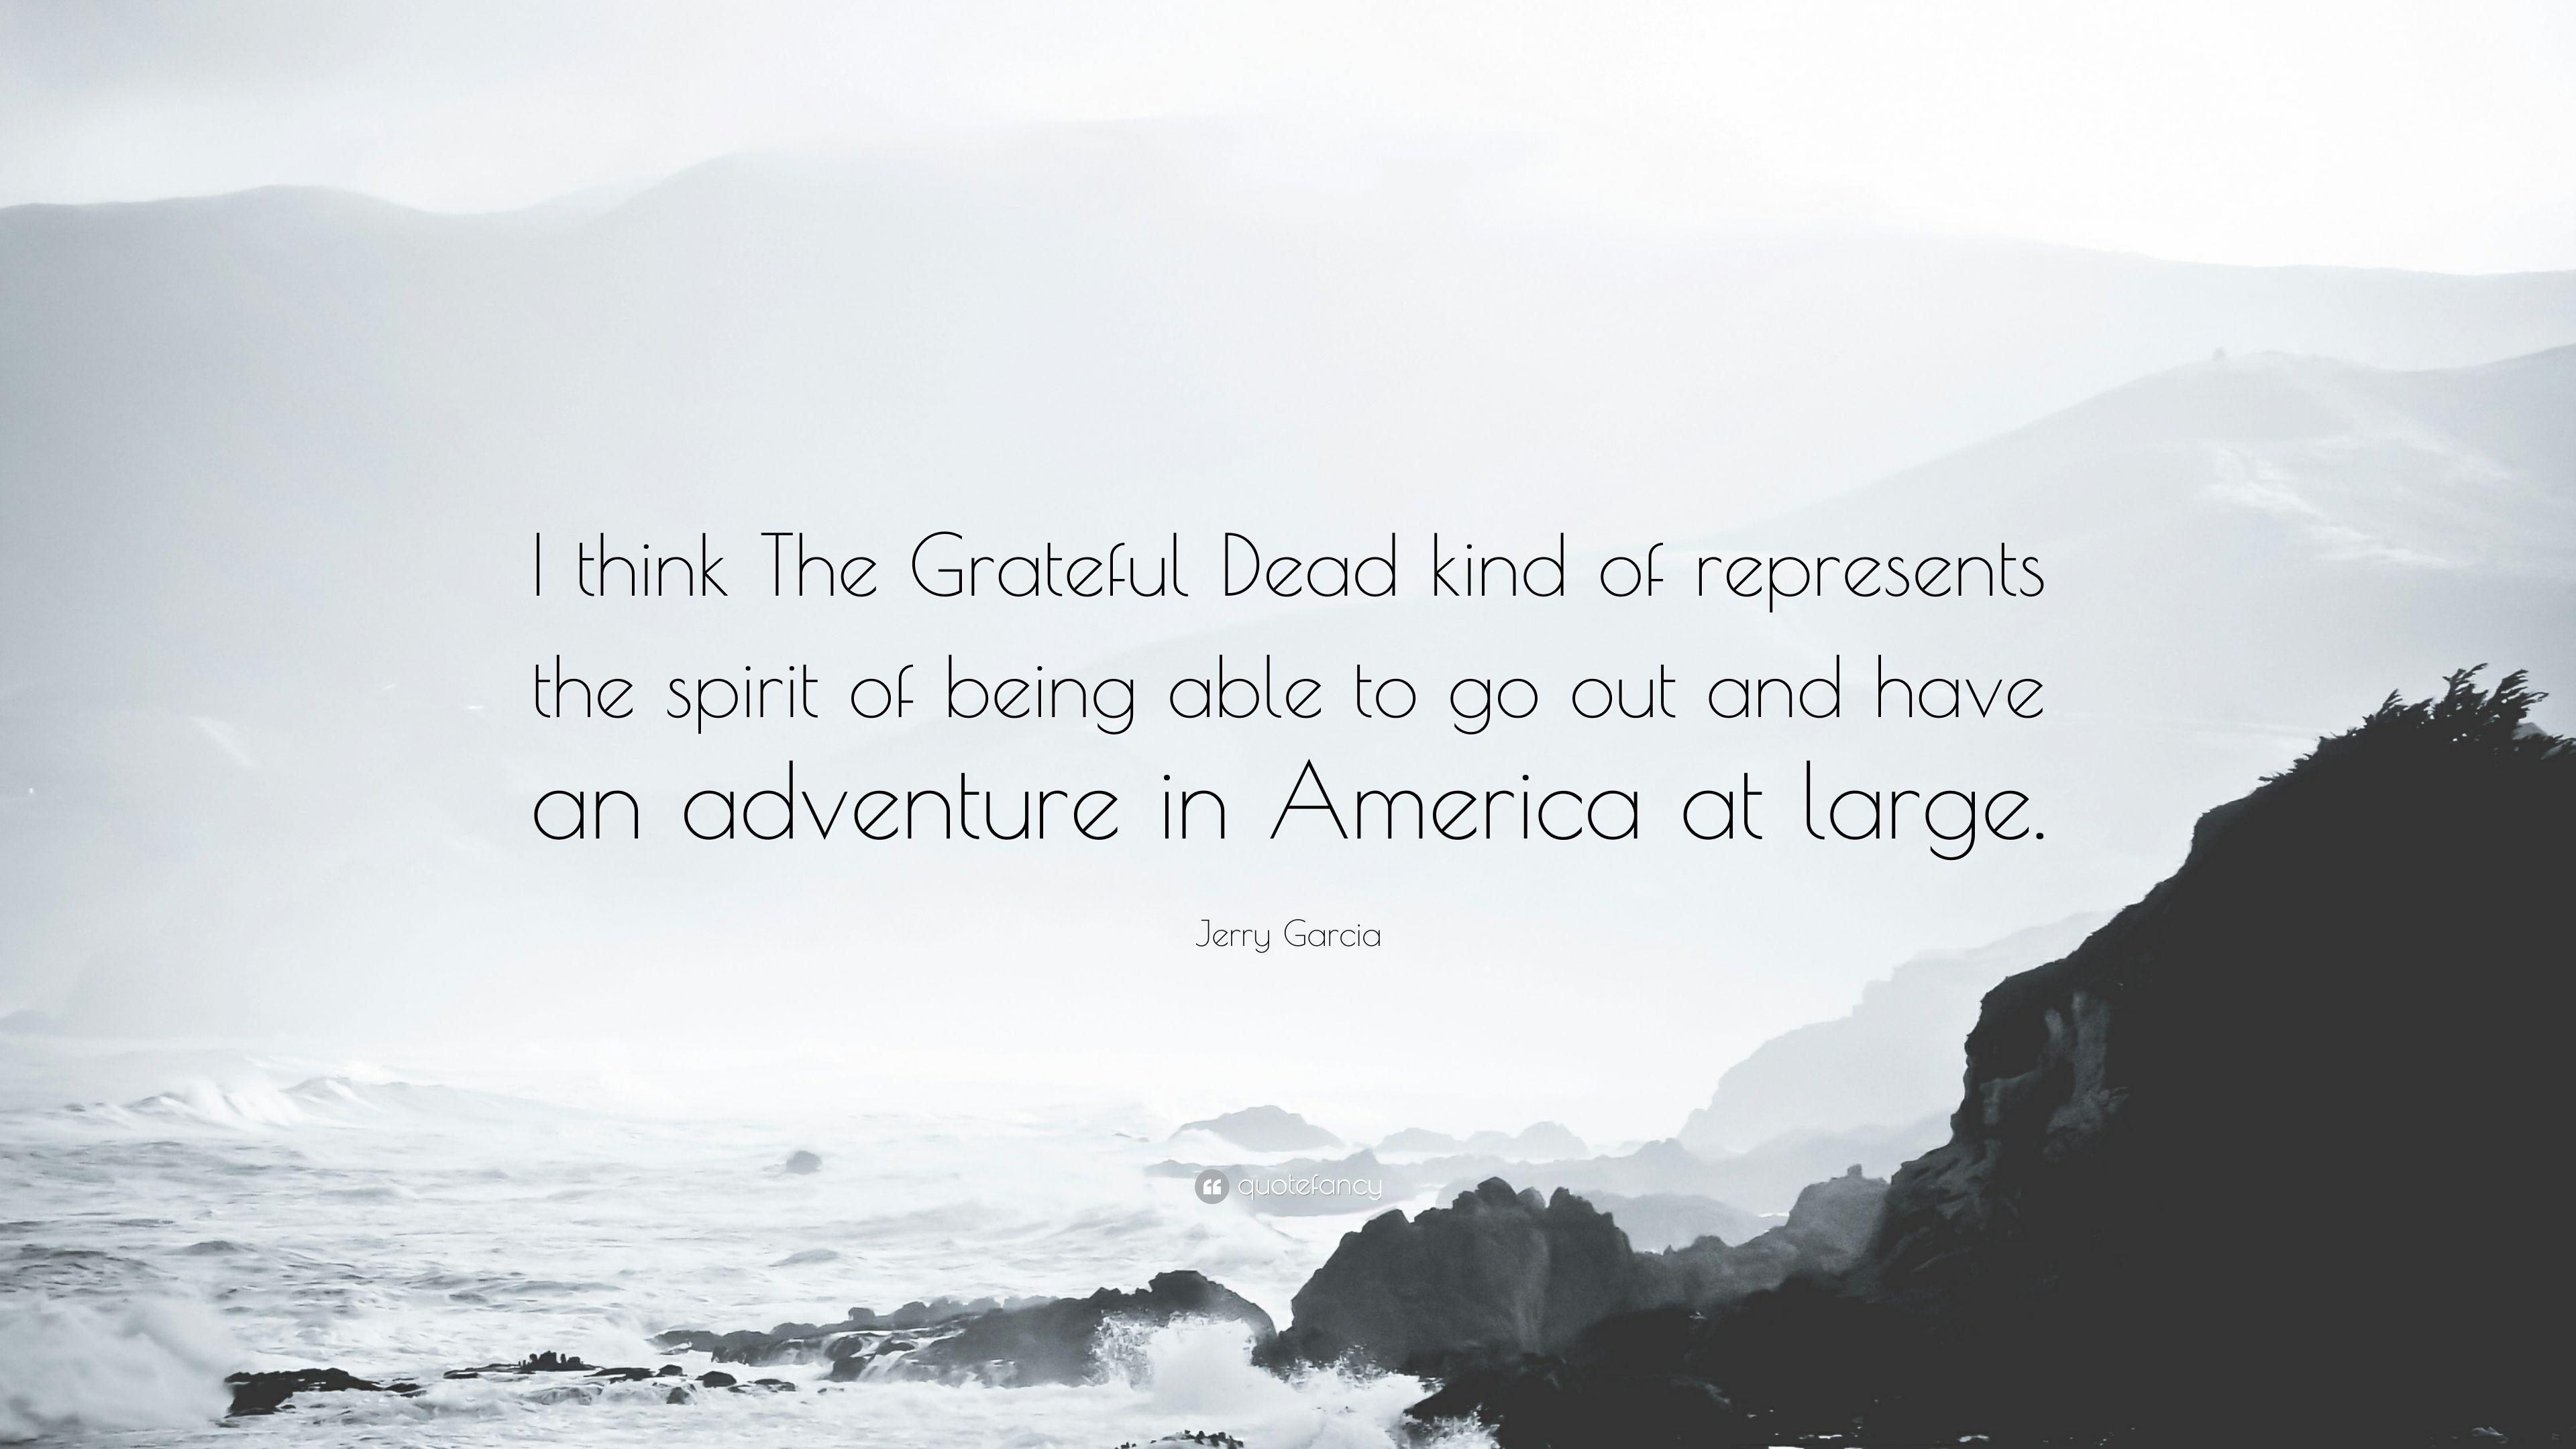 Jerry Garcia Quote: “I think The Grateful Dead kind of represents